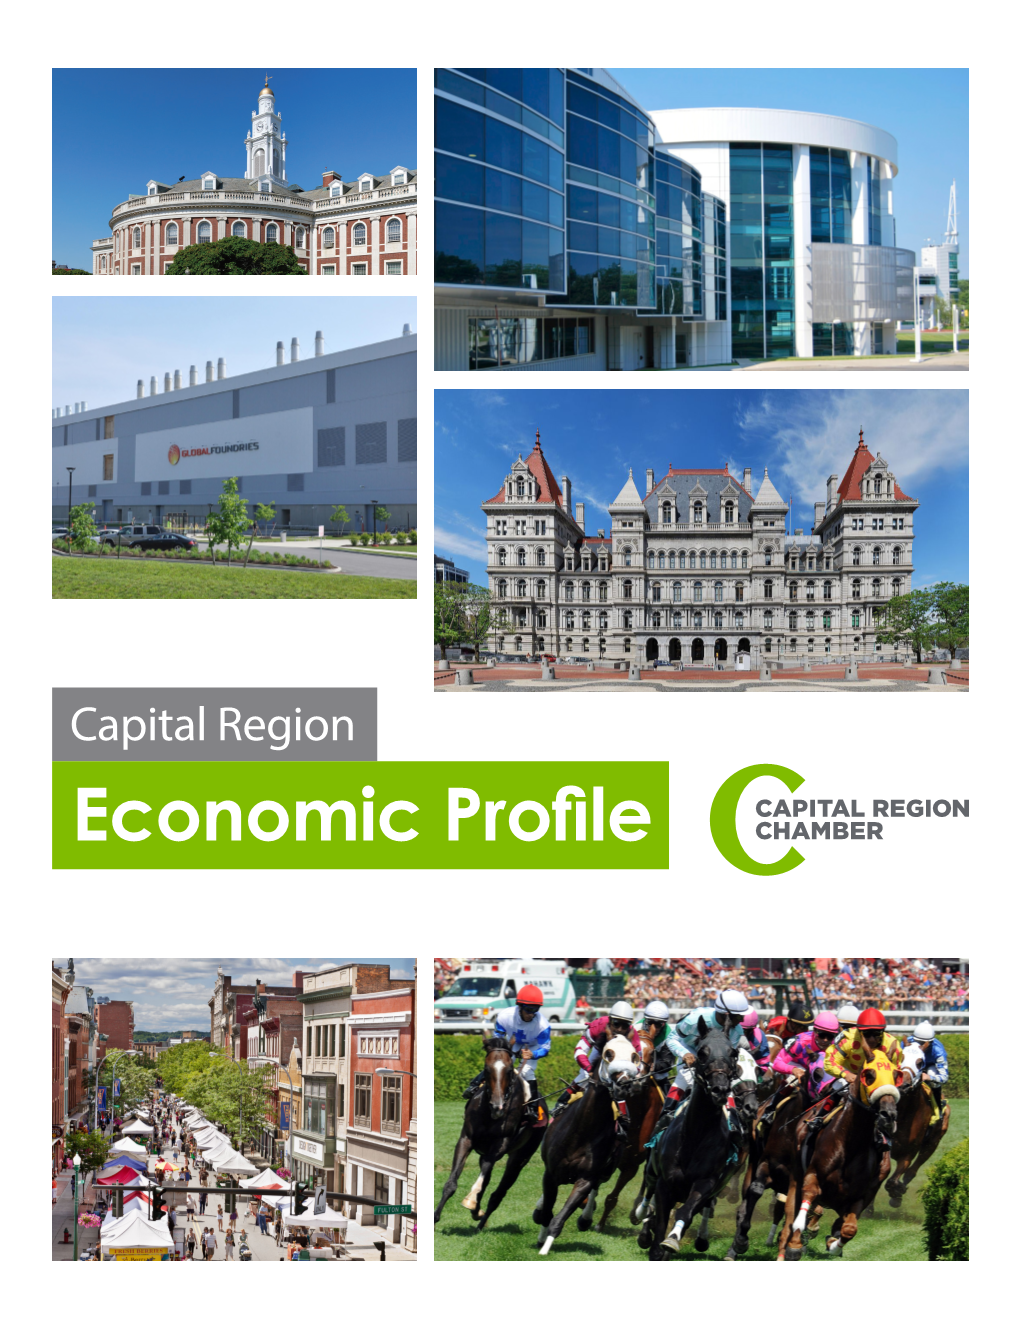 Economic Profile the Capital Region, Which Includes the Counties of Albany, Rensselaer, Saratoga, and Schenectady Counties, Is the Center of New York’S Tech Valley